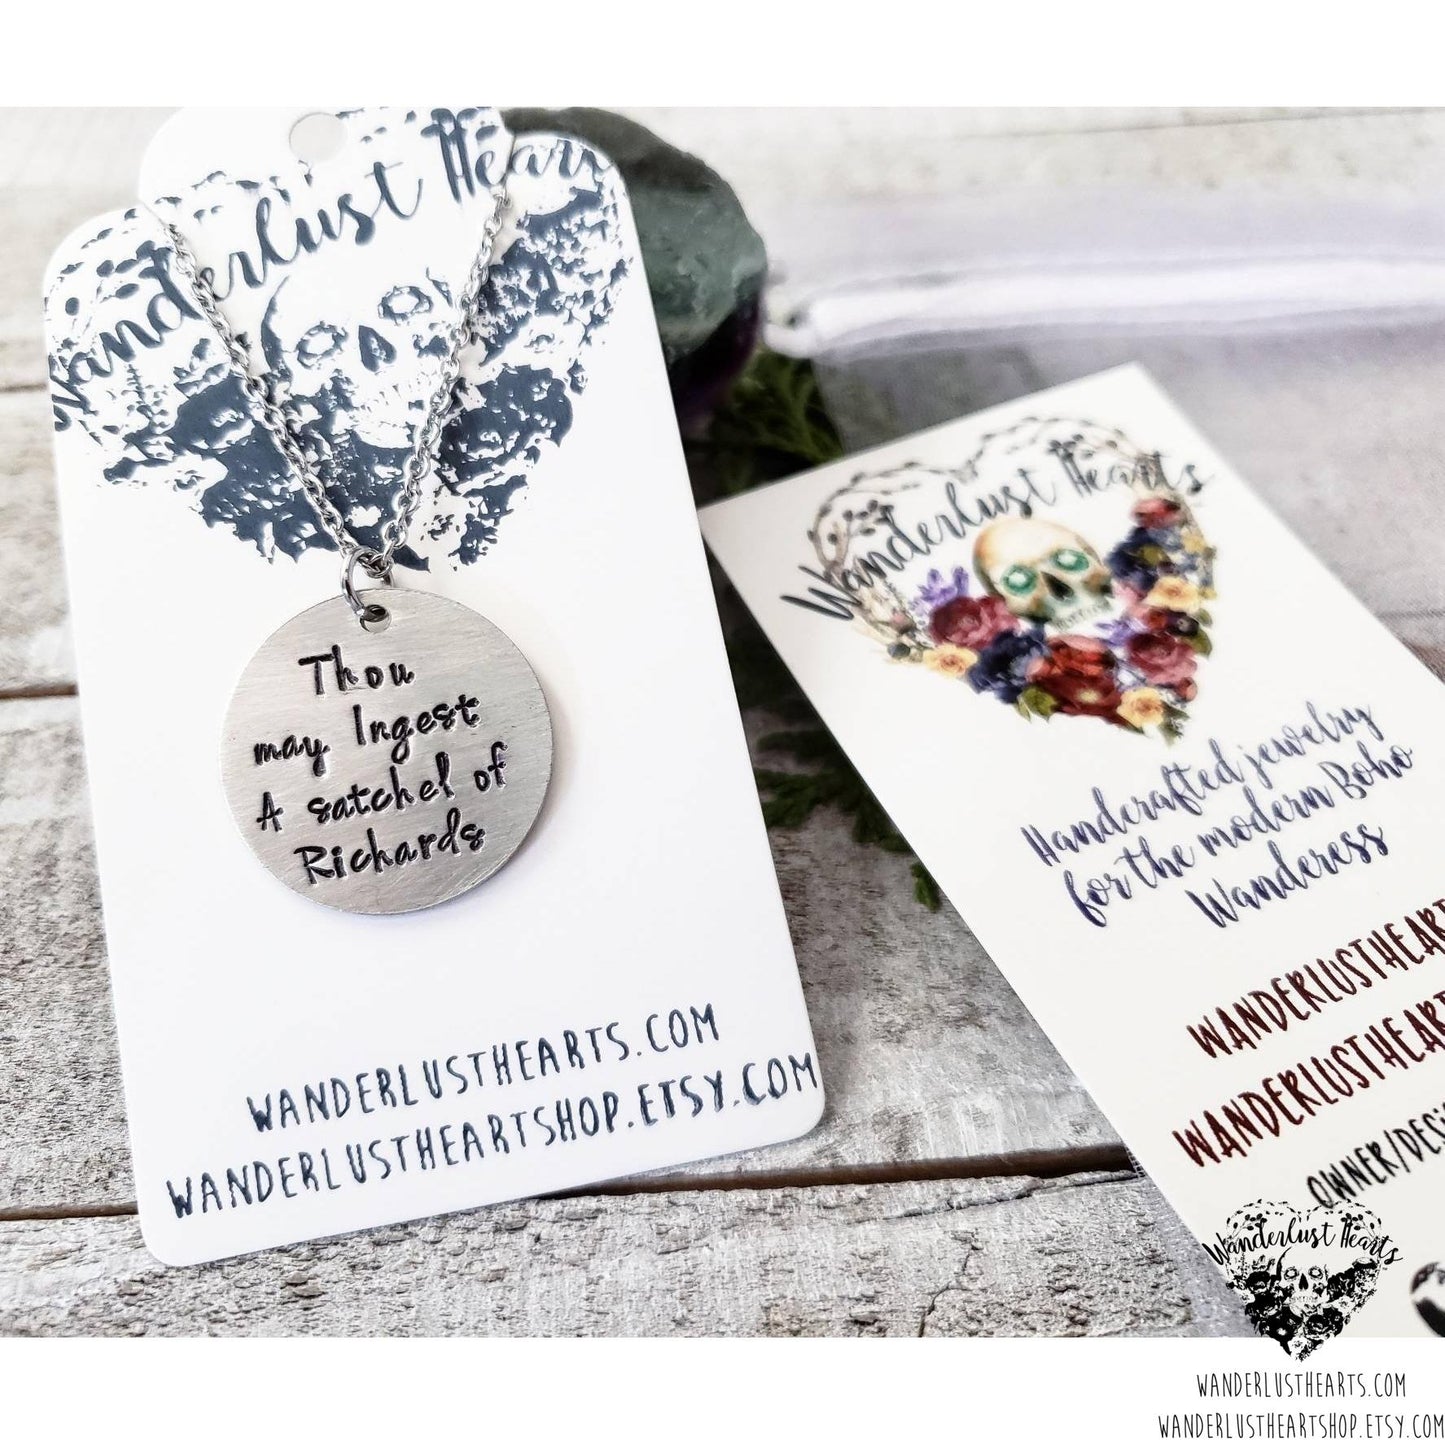 Thou may ingest a satchel of Richards necklace-Wanderlust Hearts